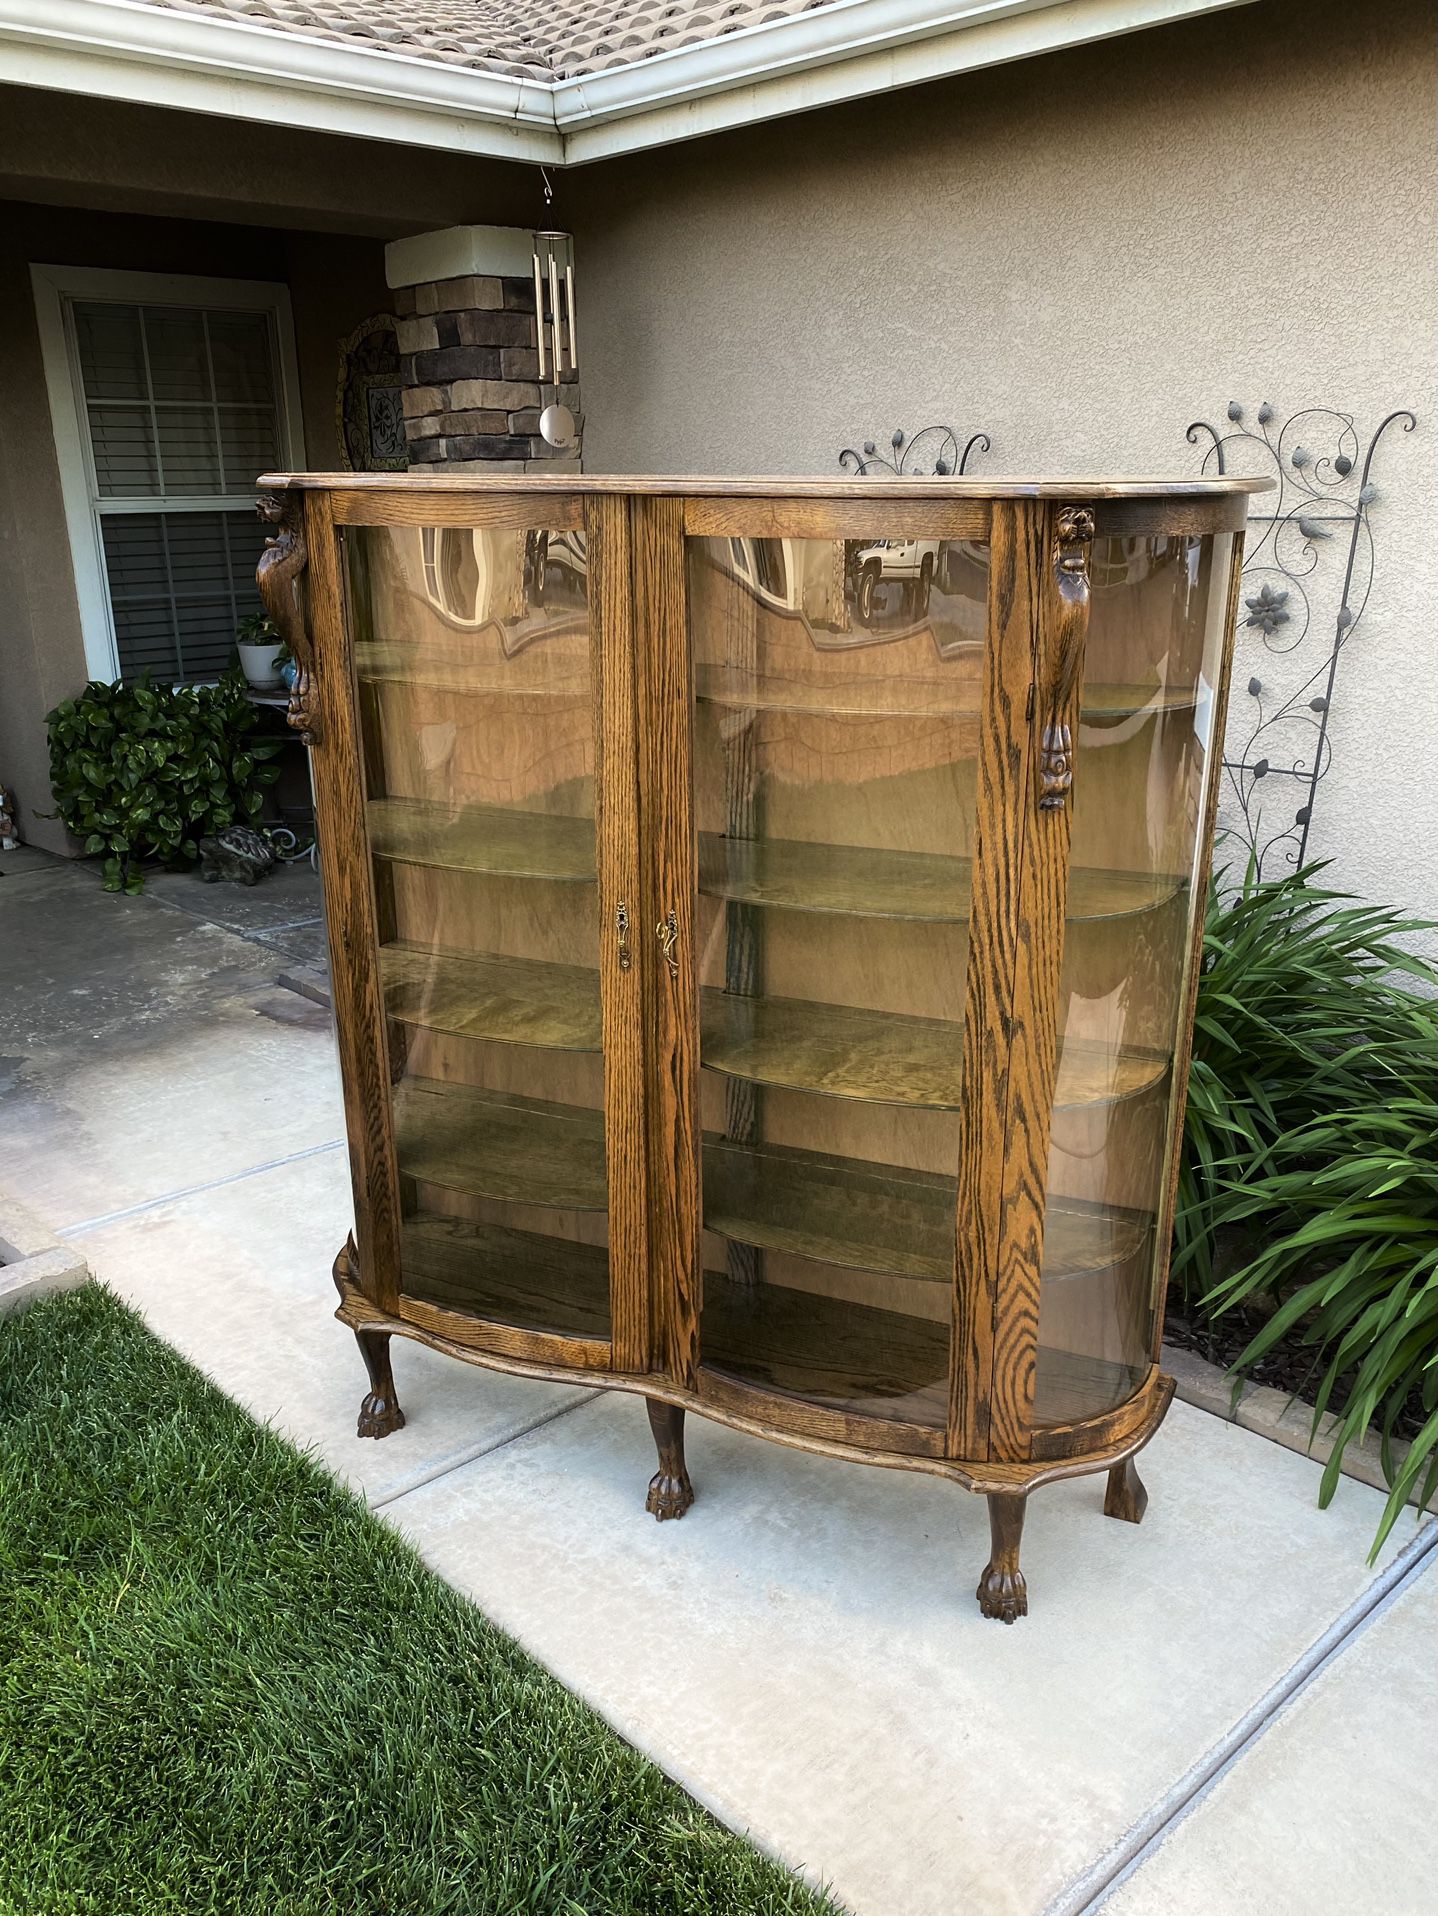 VINTAGE SIDE BY SIDE BOW FRONT CURIO / COLLECTORS DISPLAY CABINET W/ KEY (CARVED DETAILS) 58”W X 15.5”D X 52”H